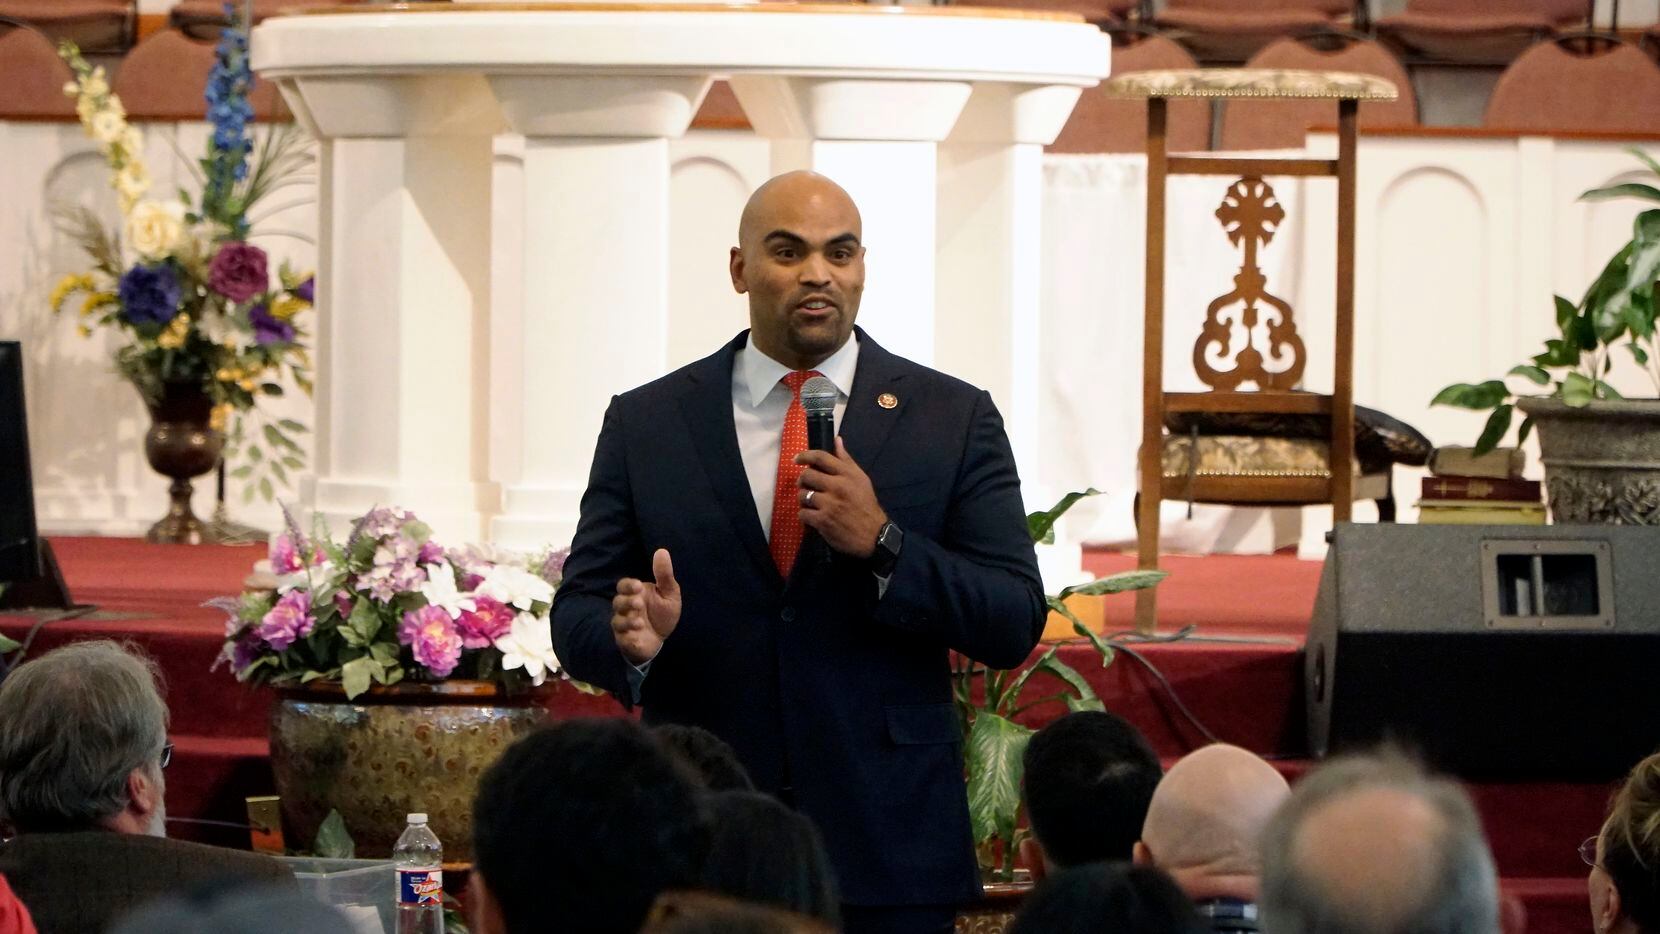 Rep. Colin Allred speaks during a town hall meeting at Greater Cornerstone Baptist Church in Dallas on Monday, Oct. 14, 2019.